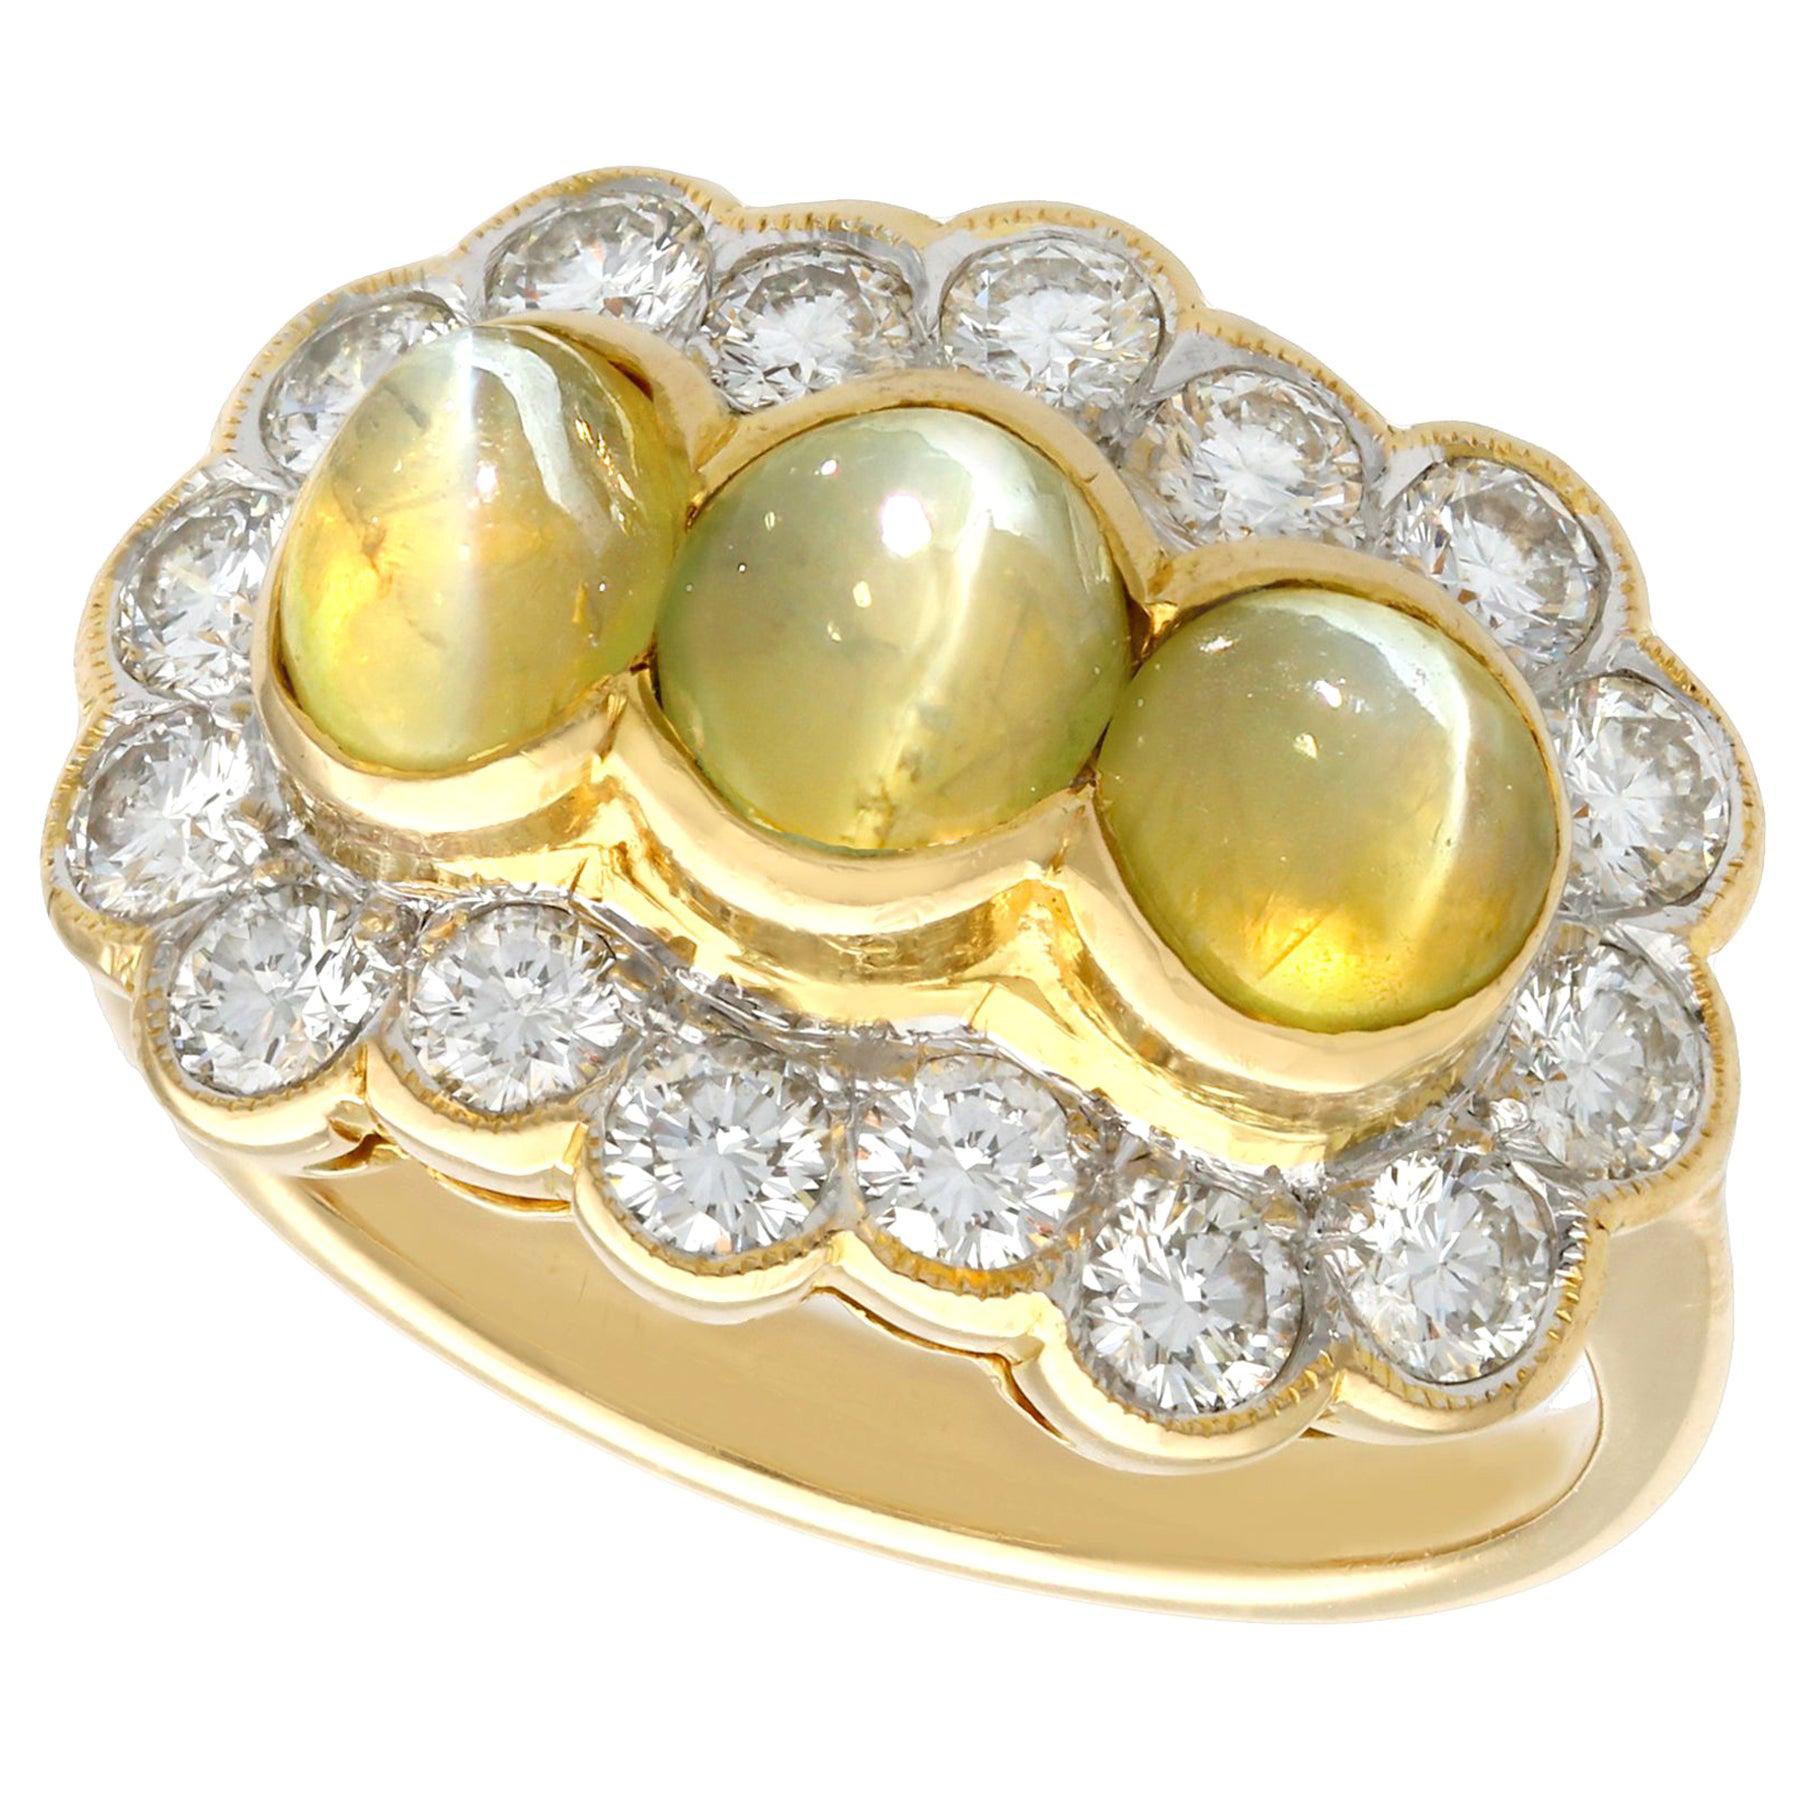 Vintage 1970s 2.19Ct Cabochon Cut Chrysoberyl and Diamond Gold Cocktail Ring For Sale